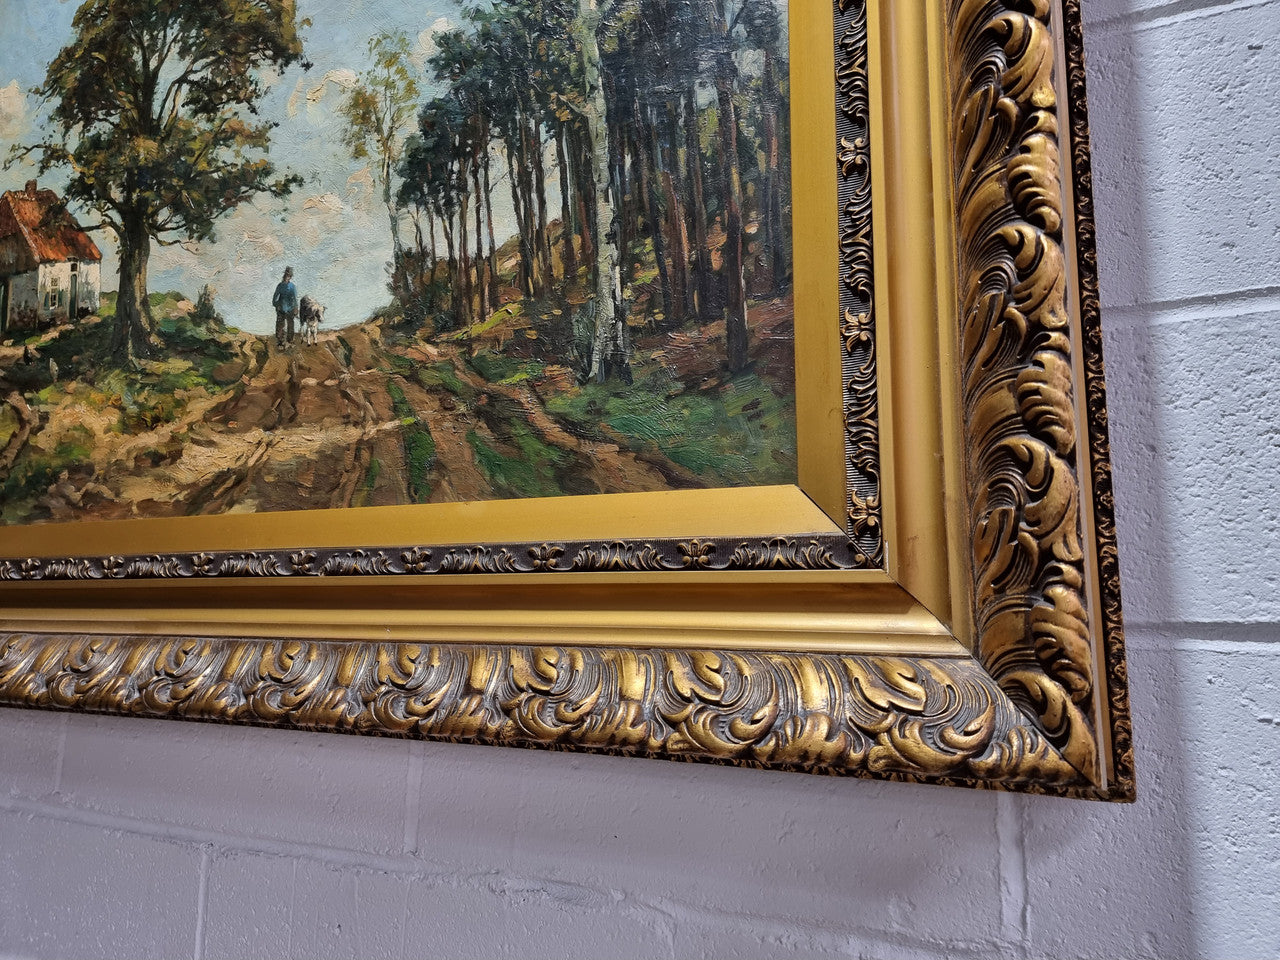 Sourced from France is this beautiful Impressionist oil on canvas painting by "BAREND BROWER" (1872-1936). It is framed in an ornate gold frame and in good original condition.